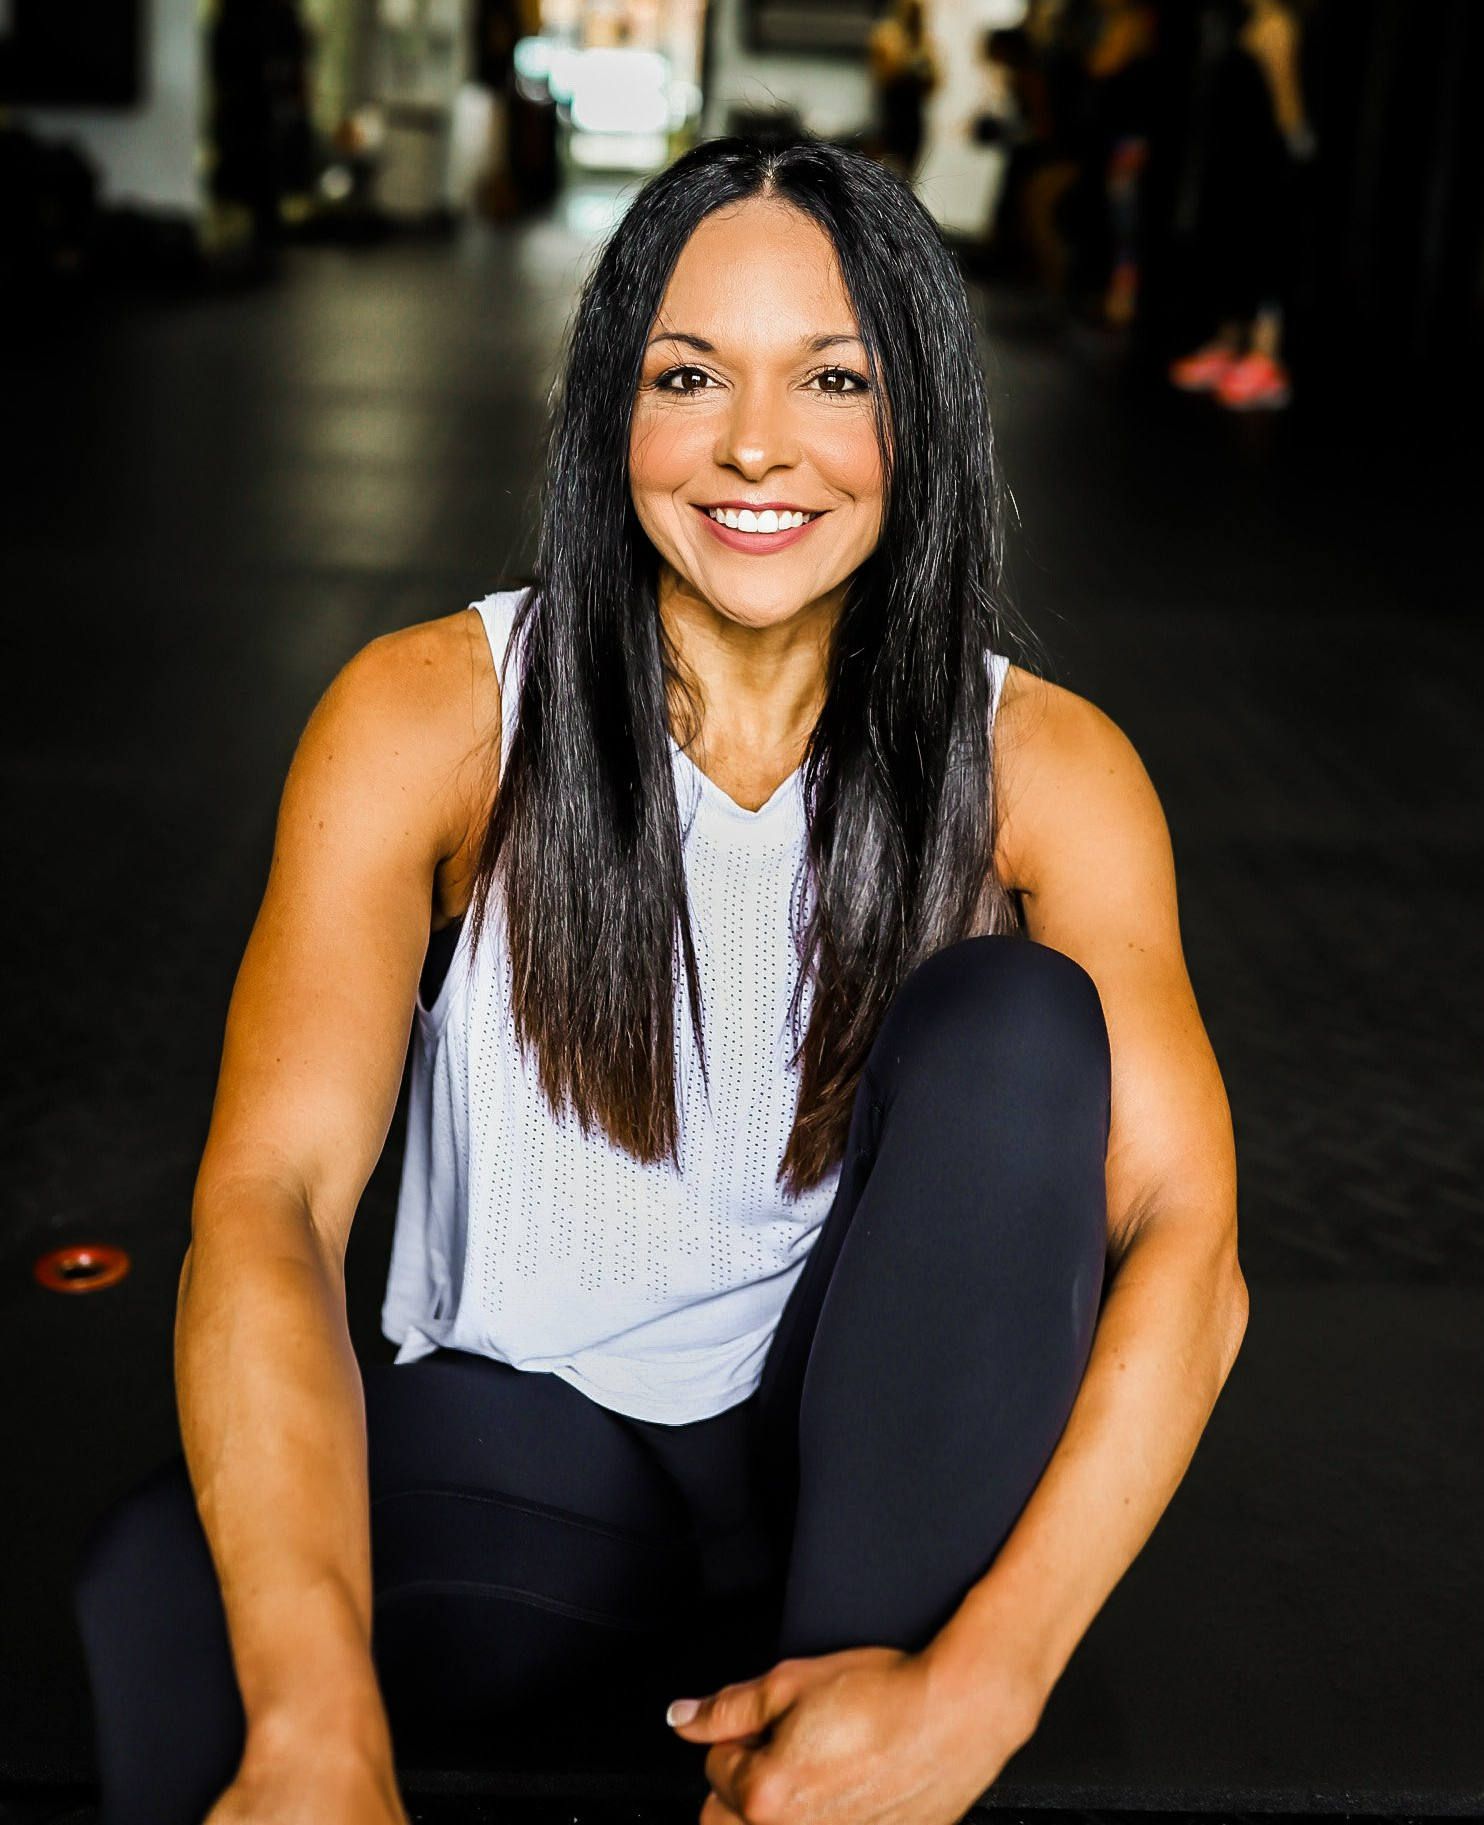 Image of Personal Trainer Yolanda Lilly